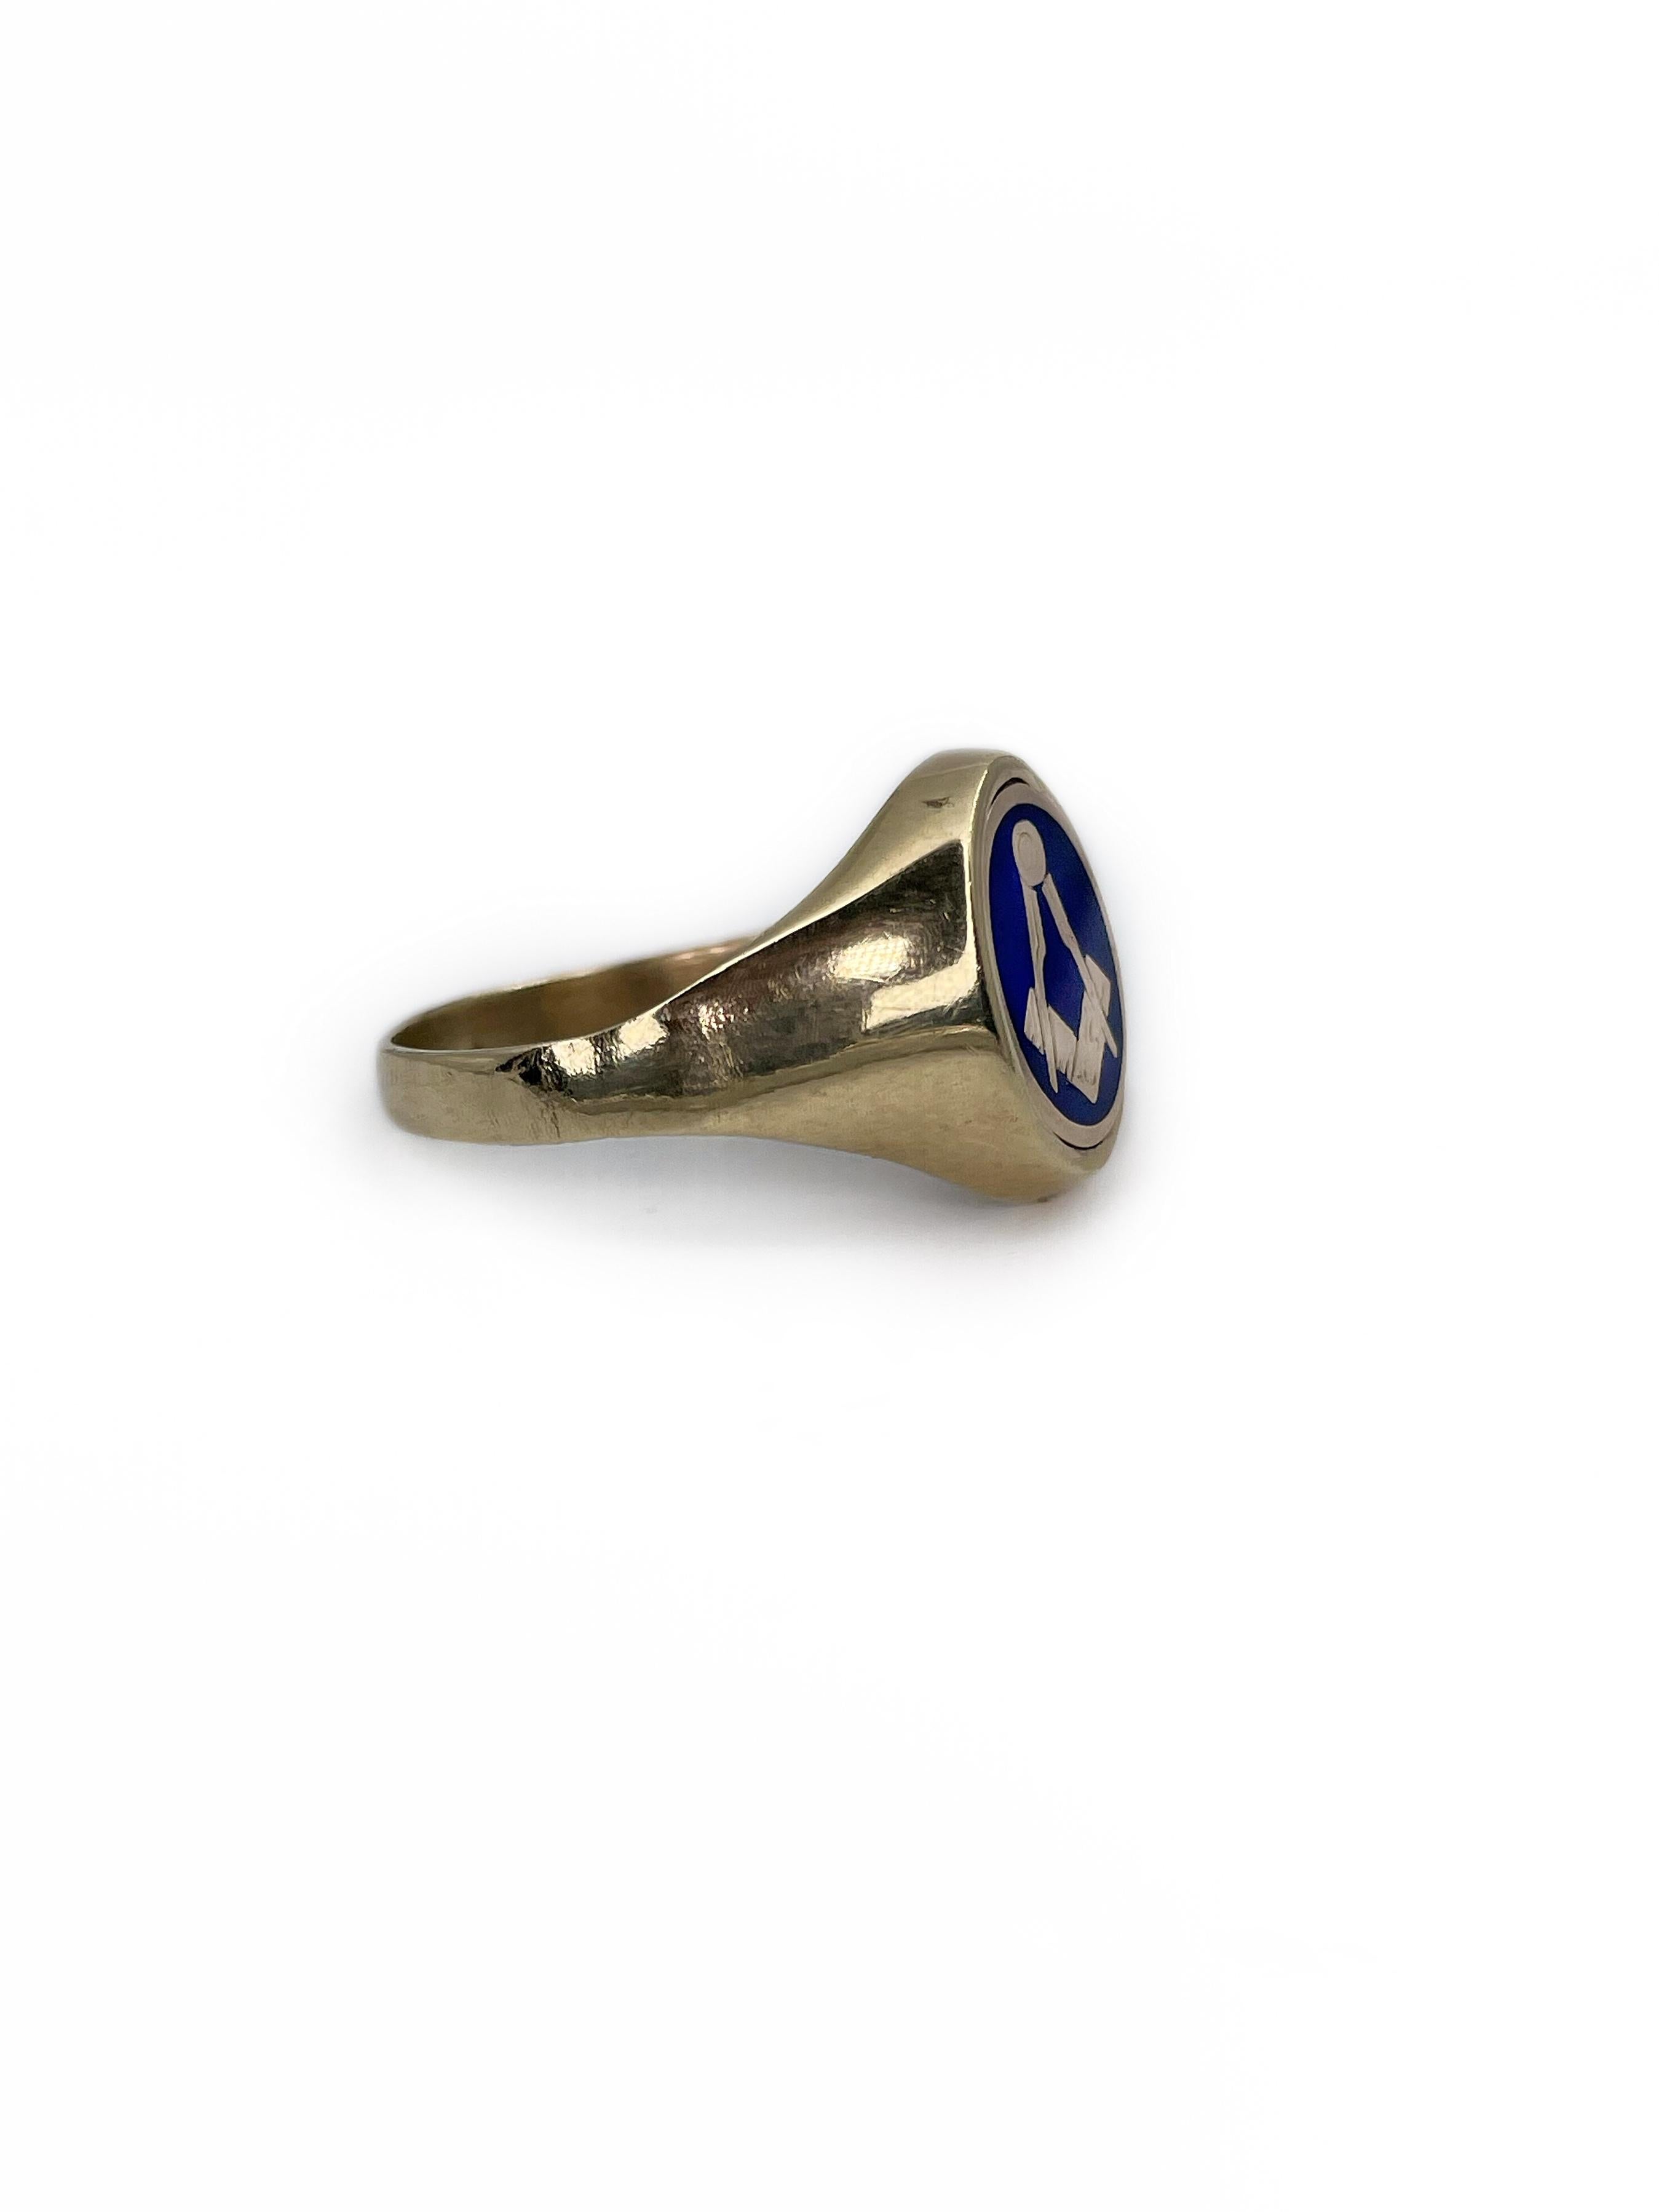 This is a swivel masonic ring crafted in 9K yellow gold. The piece features oval panel with masonic symbols of the square and compasses in blue enamel. 

Weight: 4.00g
Size: 20 (US10.25)